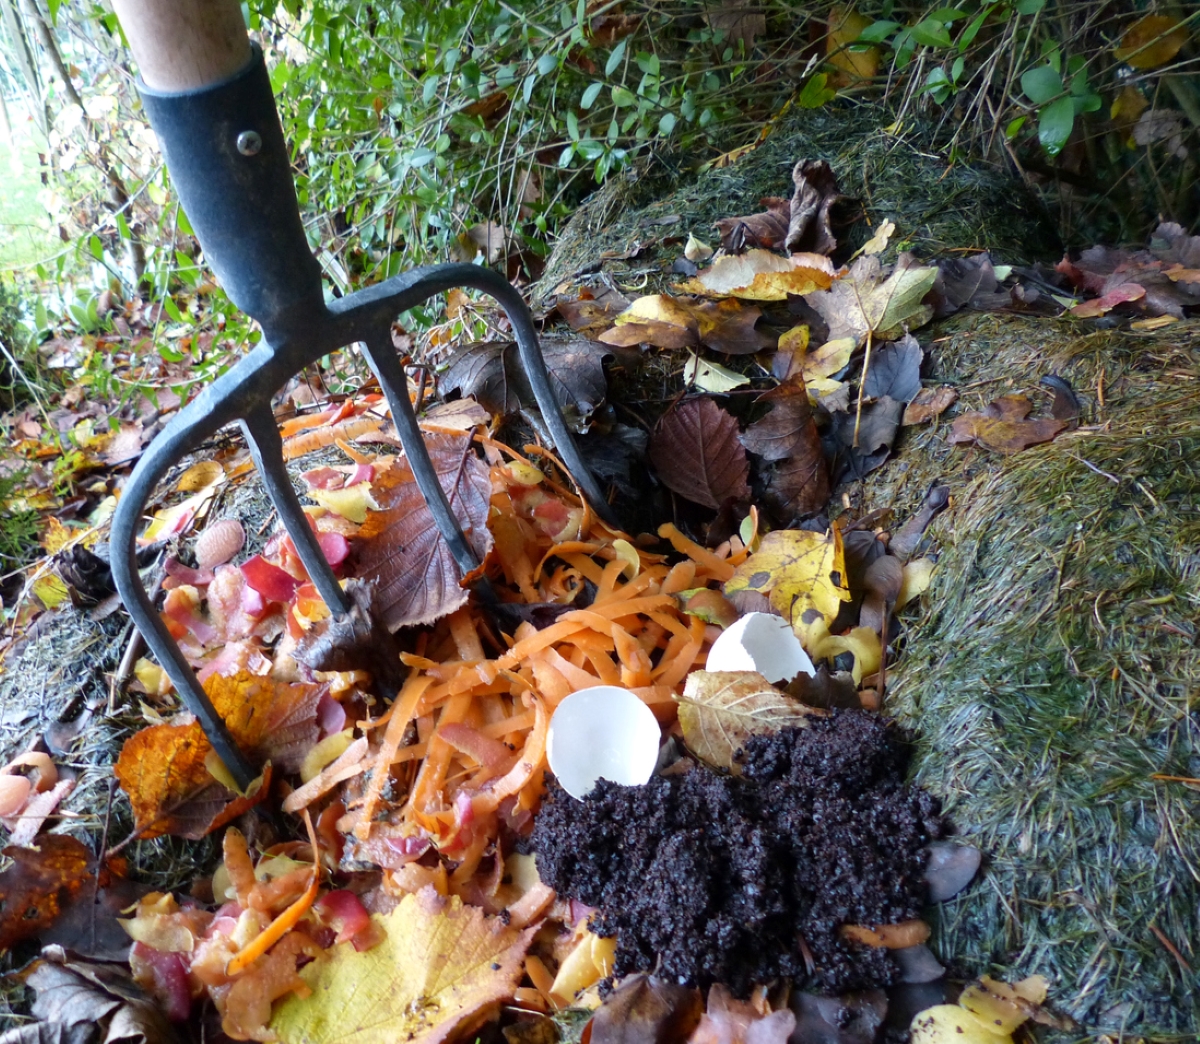 Pitchfork being used to cycle compost